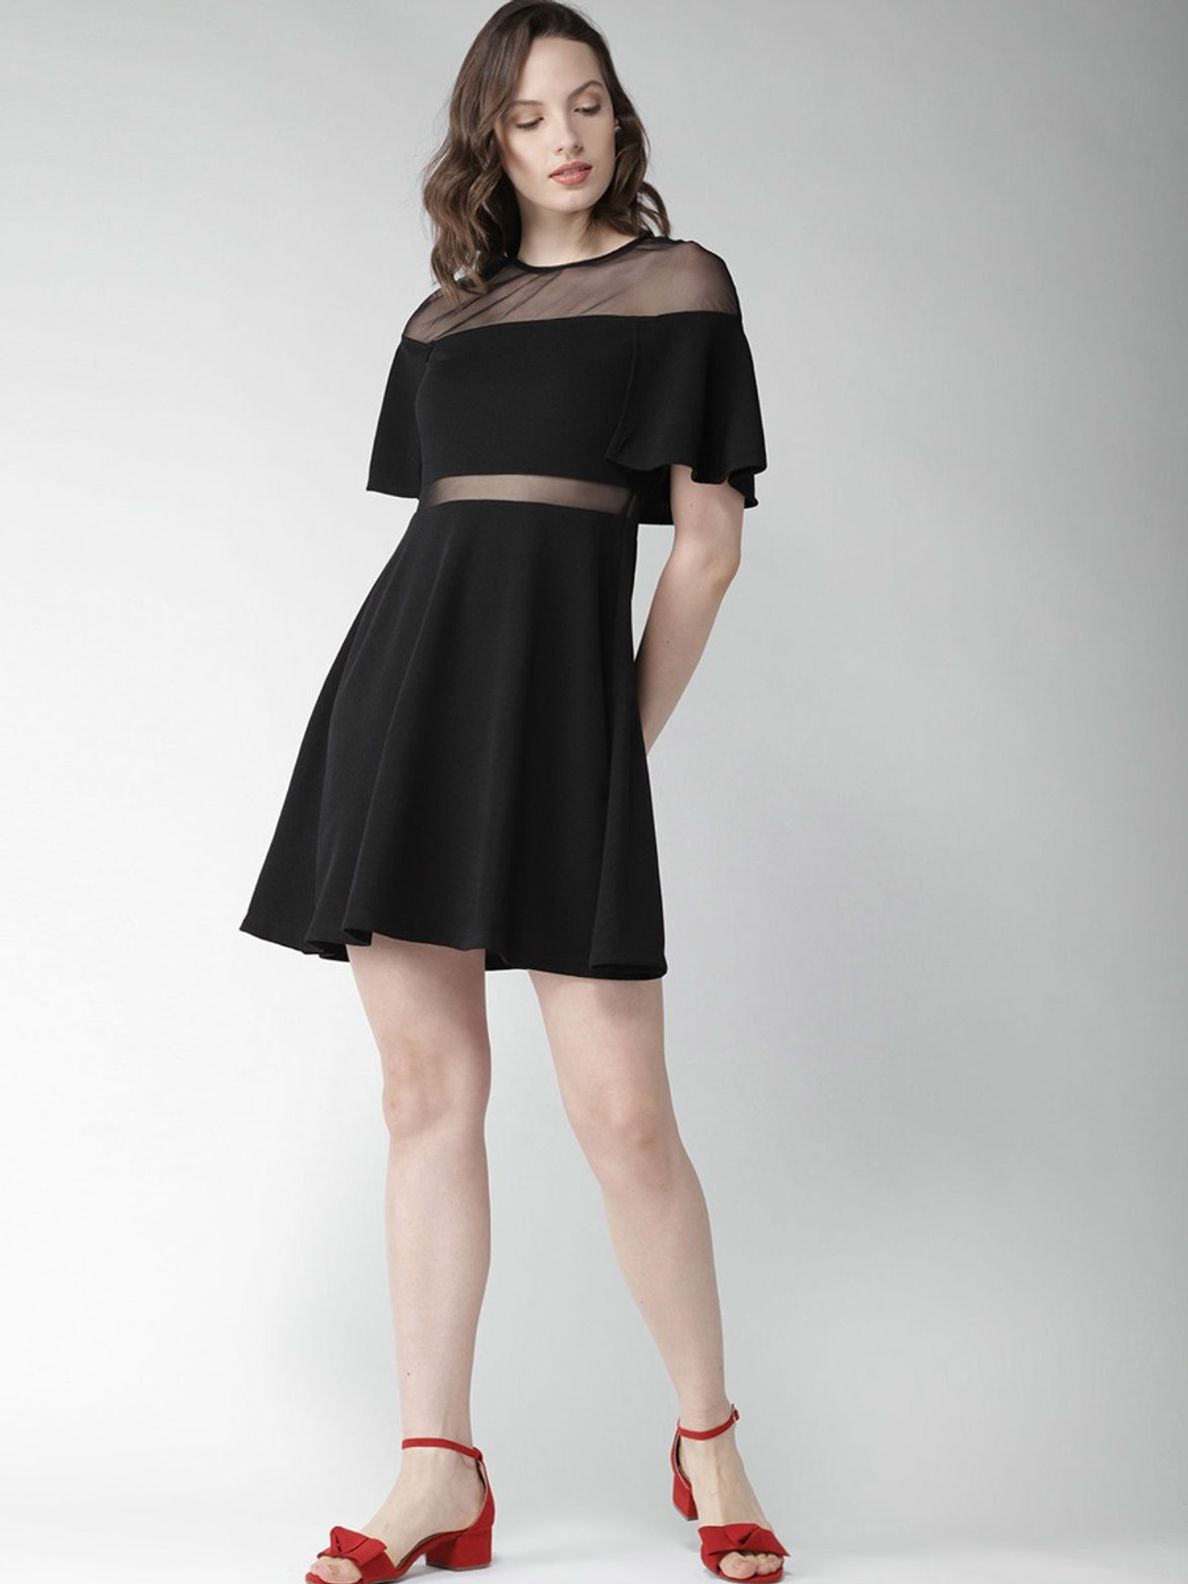 Why you need a little black dress - WHAT EVERY WOMAN NEEDS